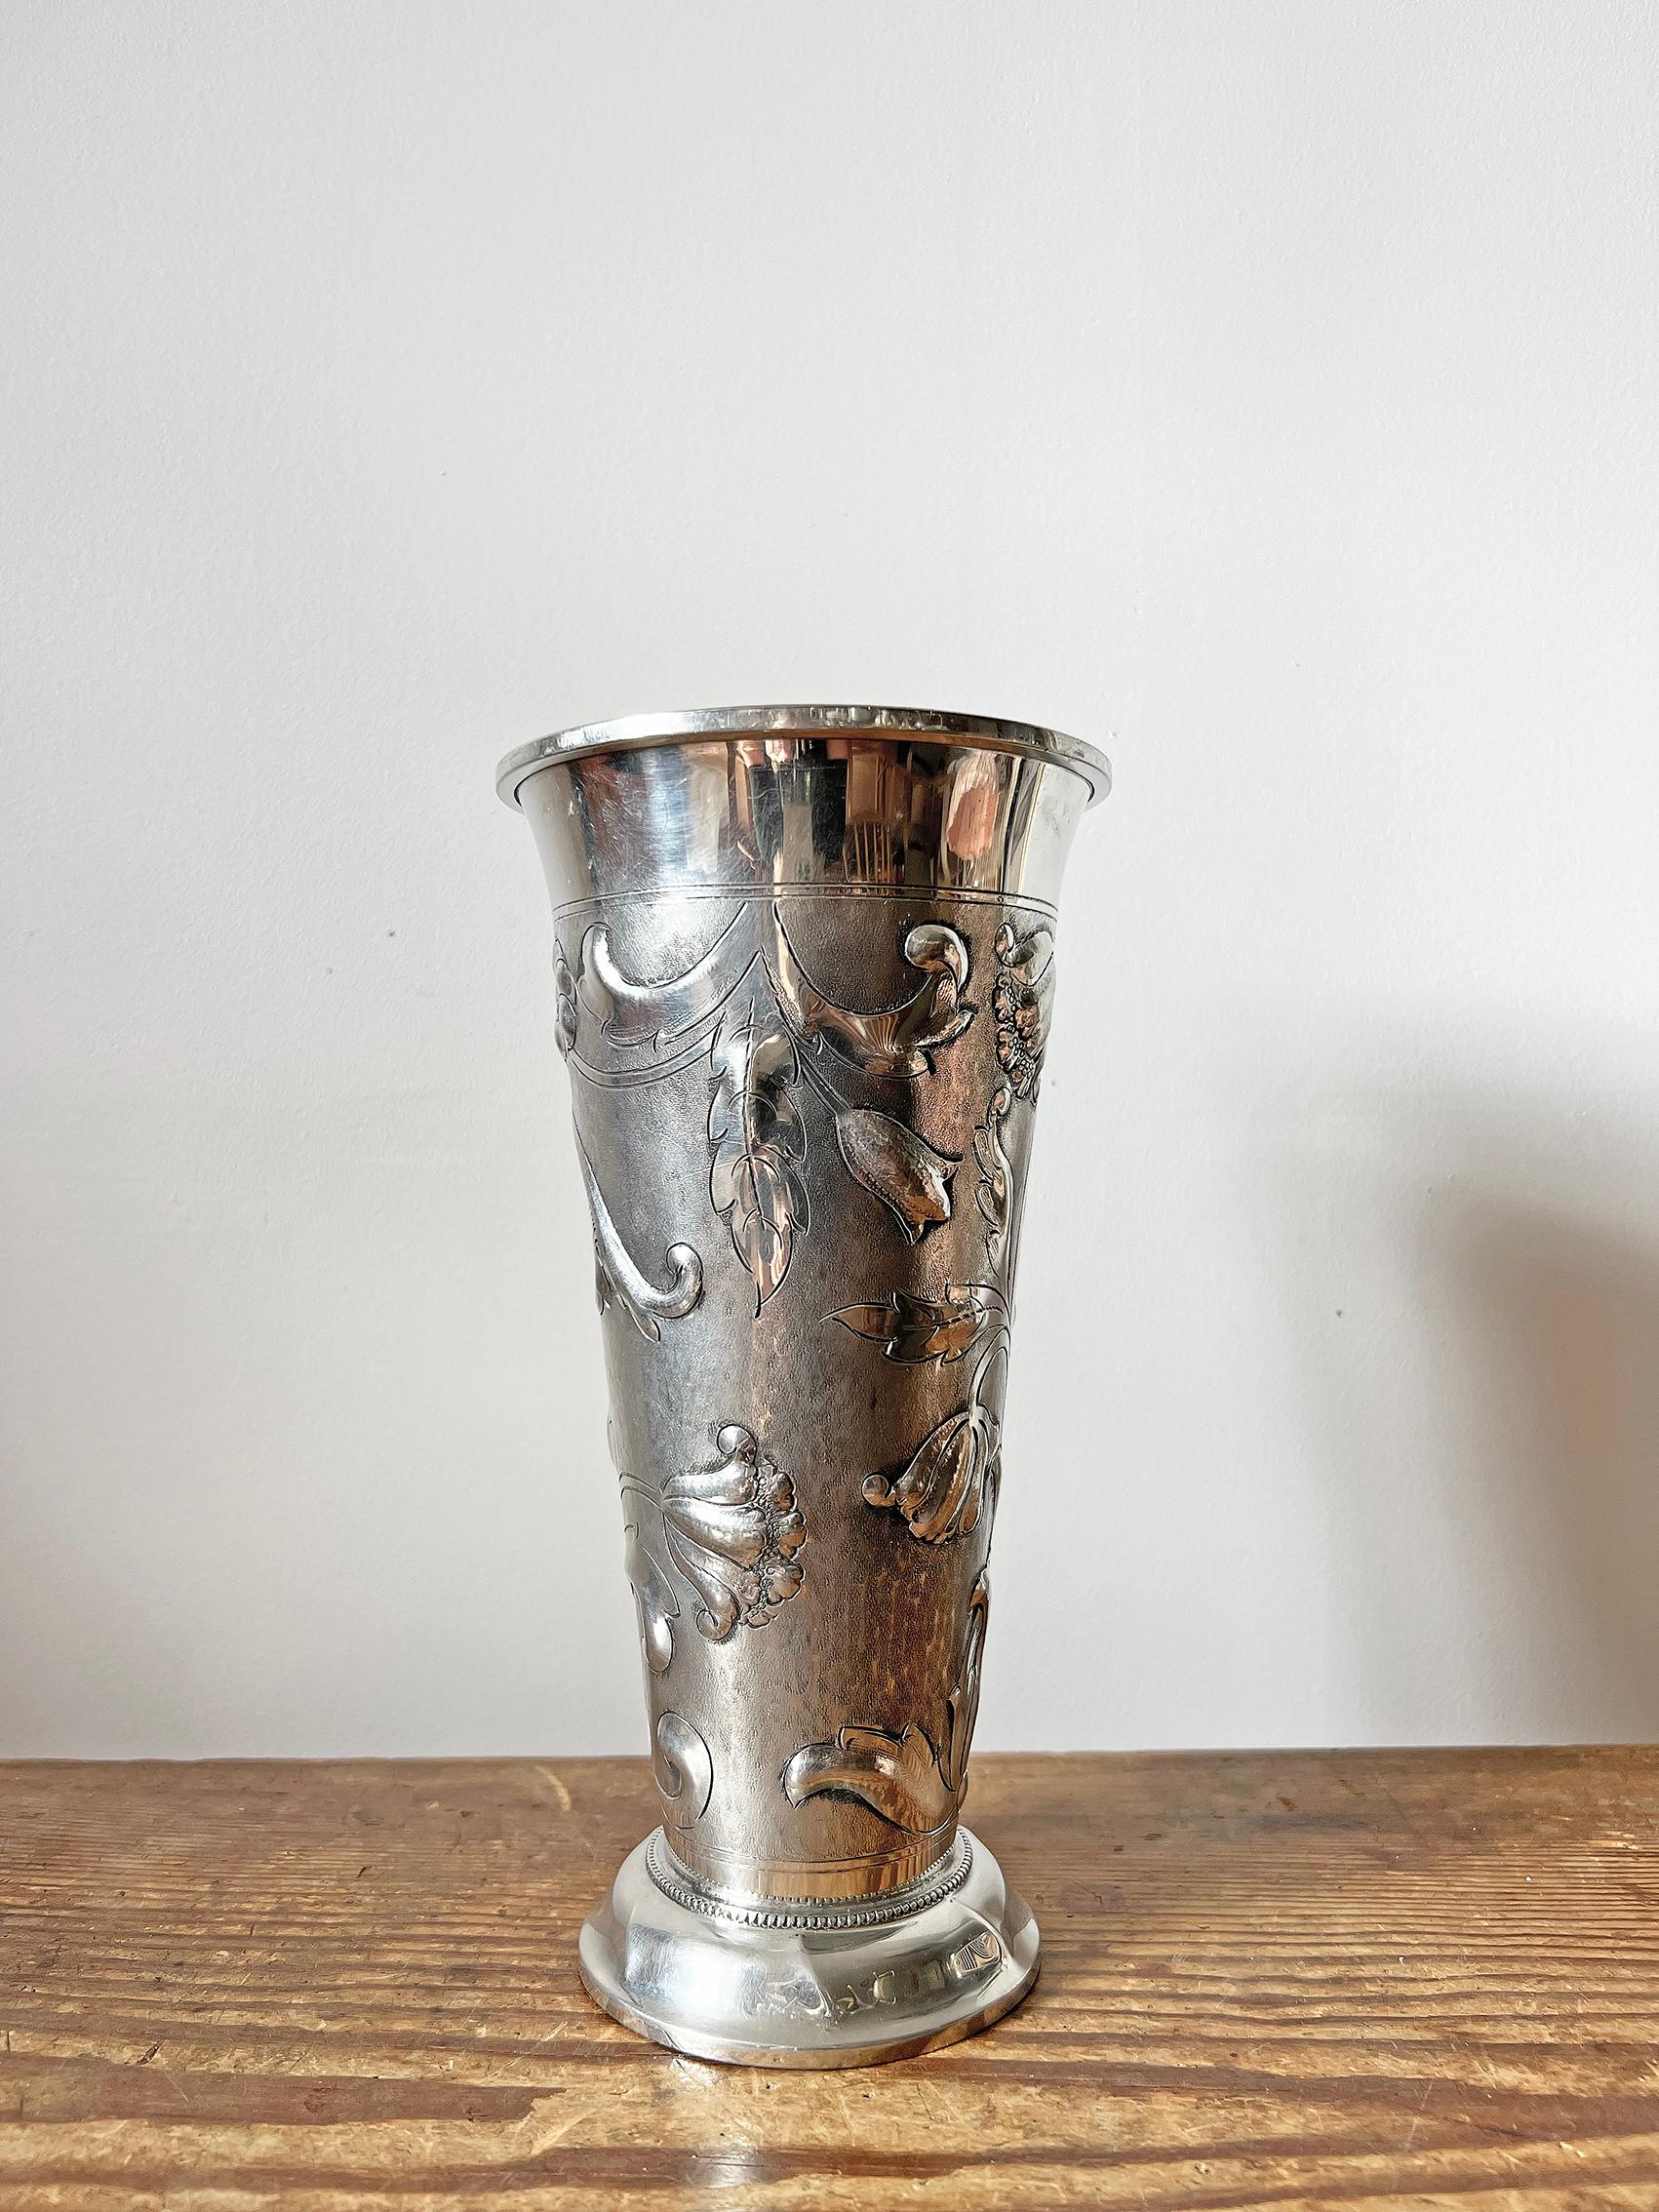 Mid-20th Century Scandinavian Modern Vase in Pewter by Tage Göthlin for Tesi -1967 For Sale